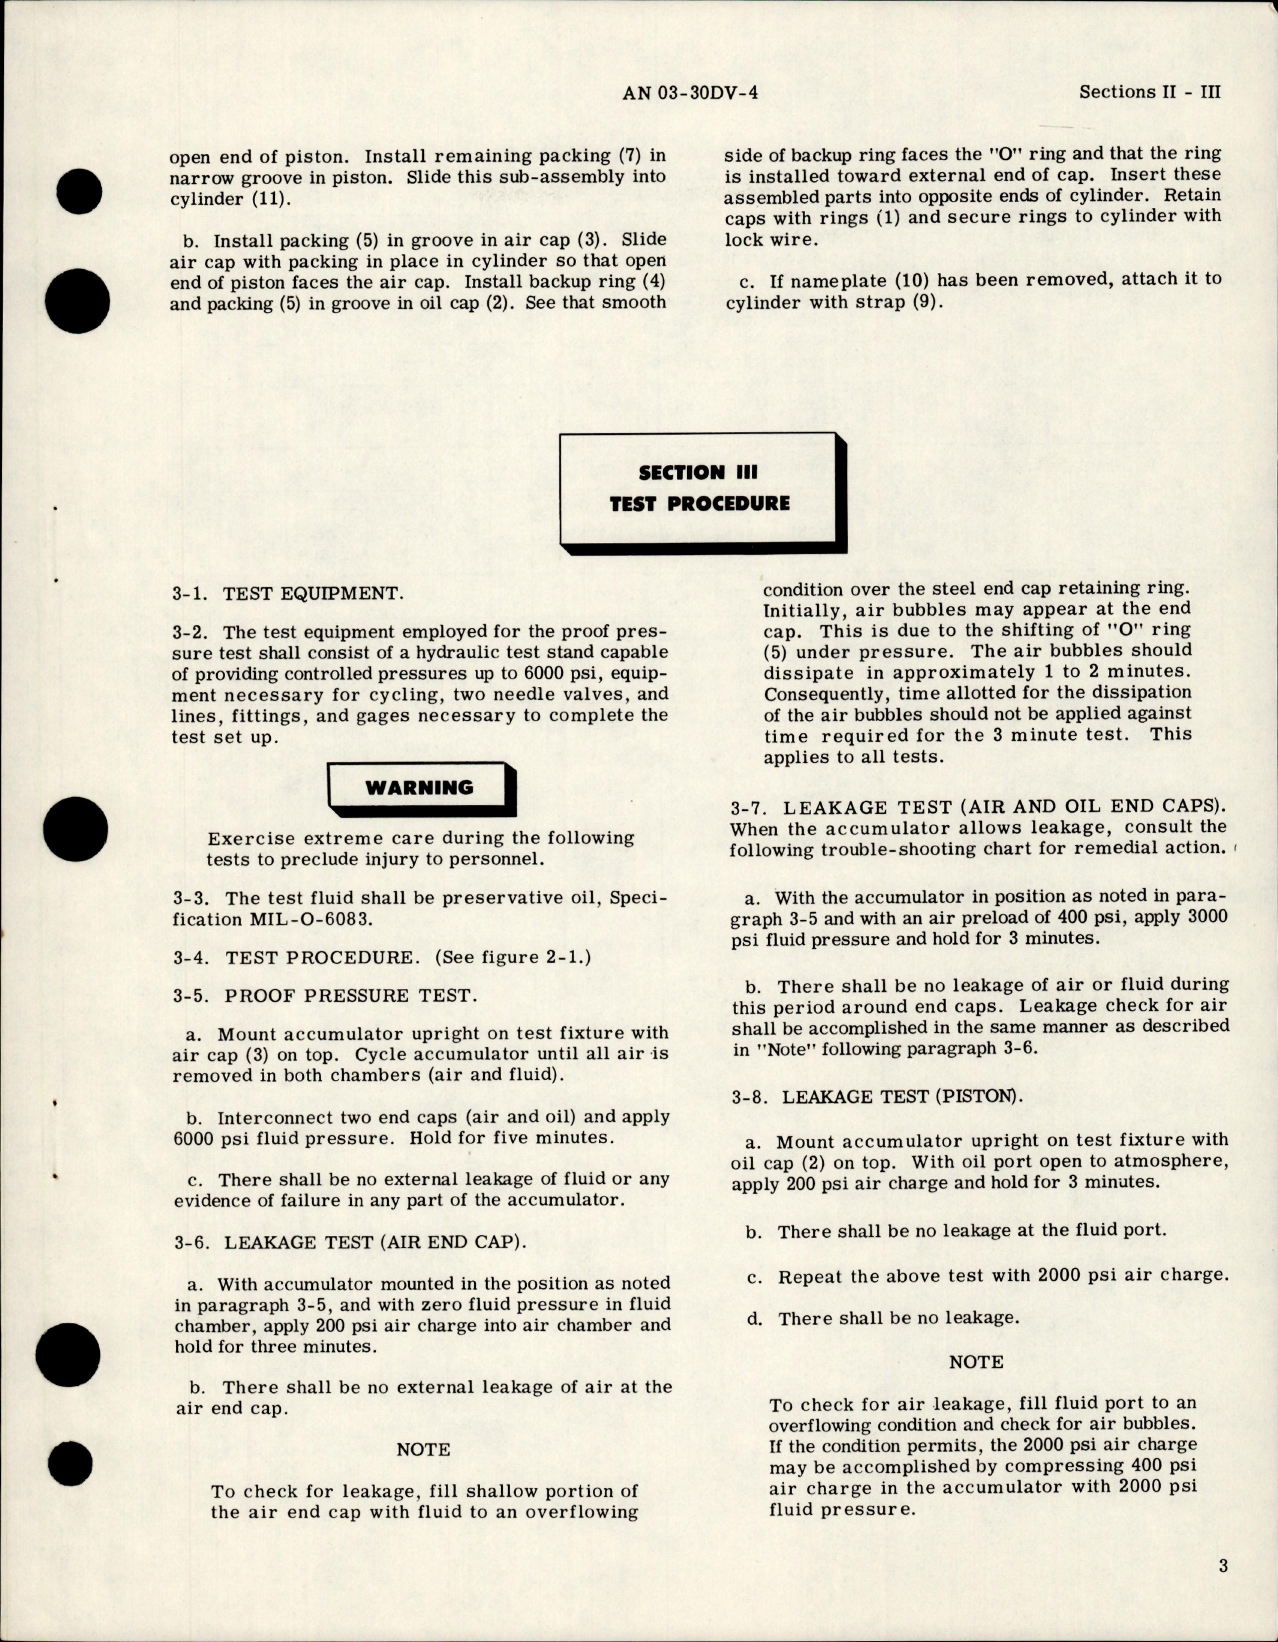 Sample page 7 from AirCorps Library document: Overhaul Instructions for Accumulators 